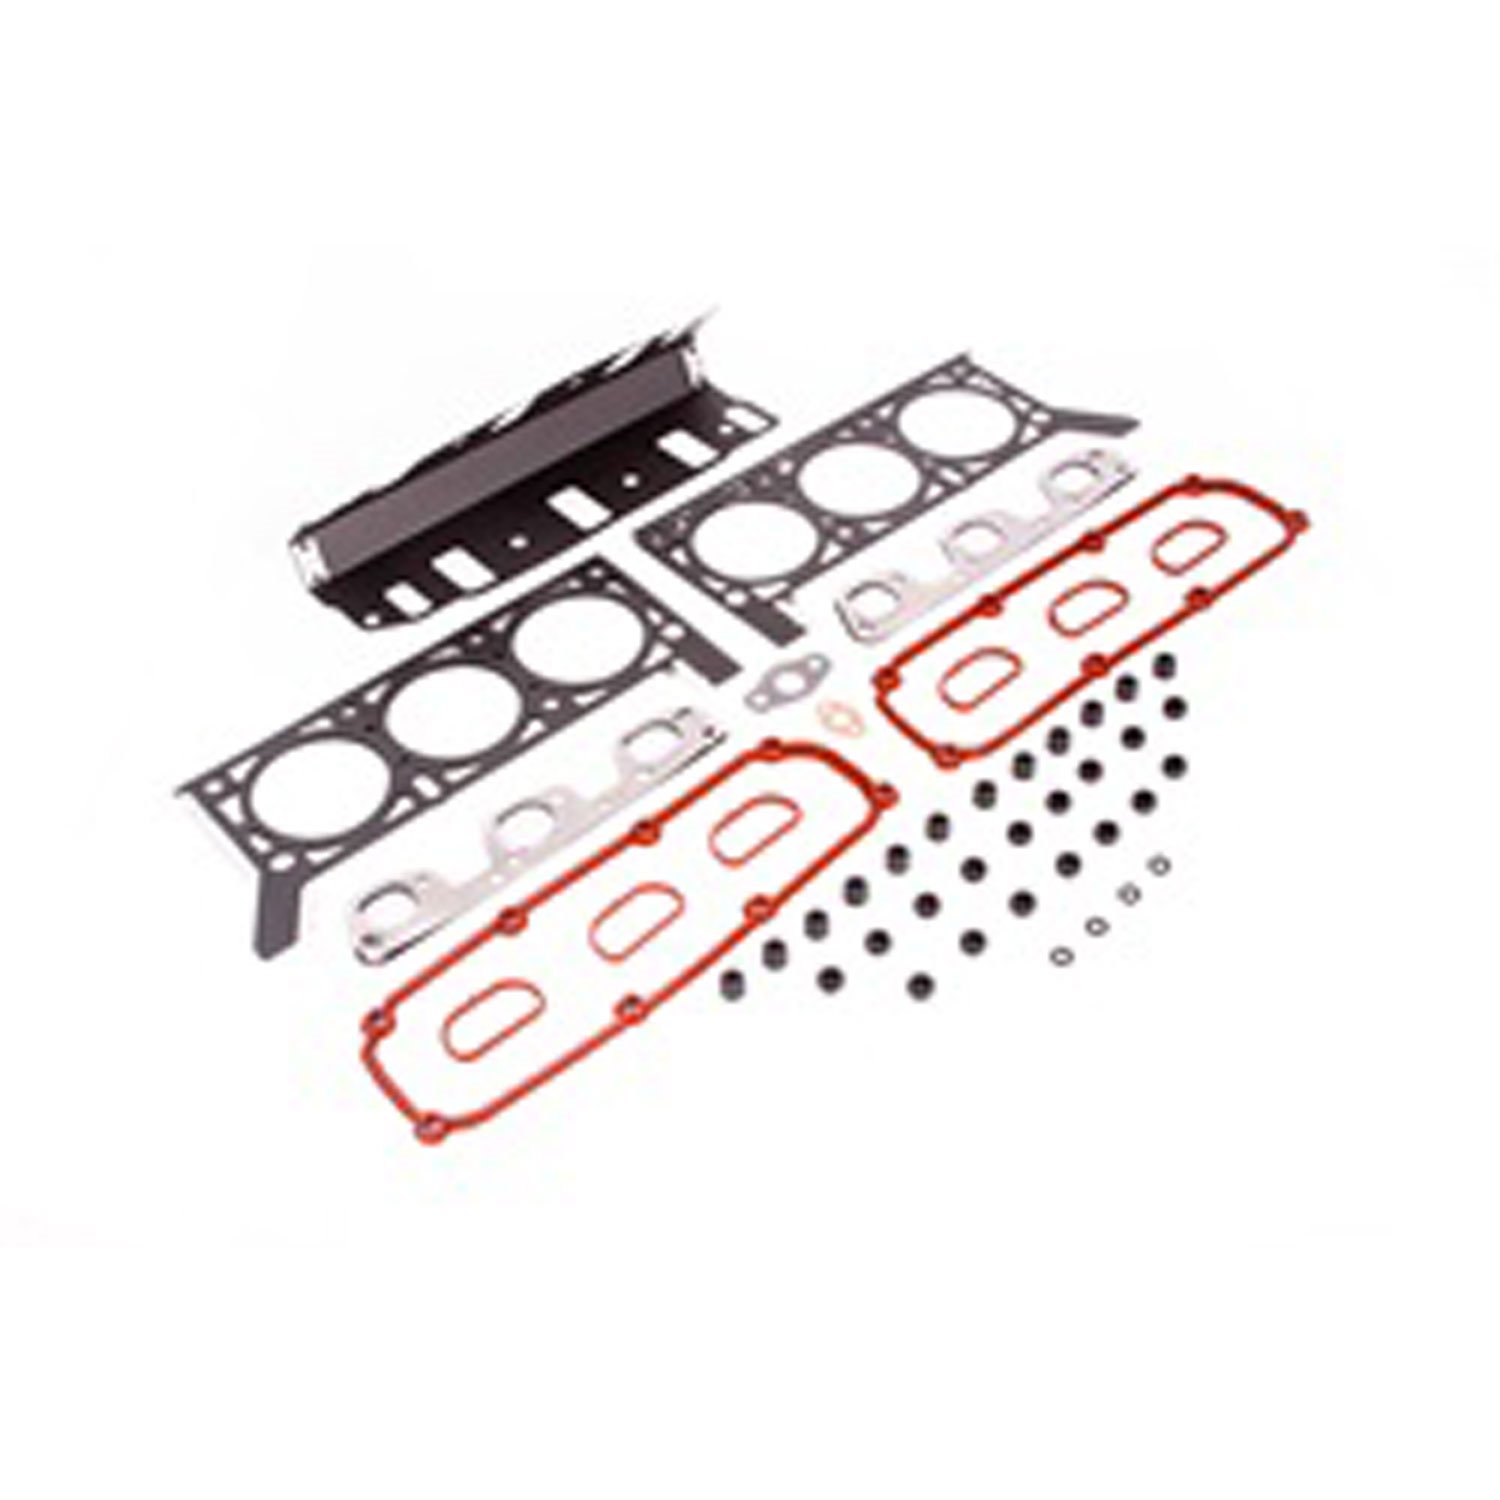 This upper engine gasket set from Omix-ADA fits 07-11 Jeep Wrangler with a 3.8L engine.